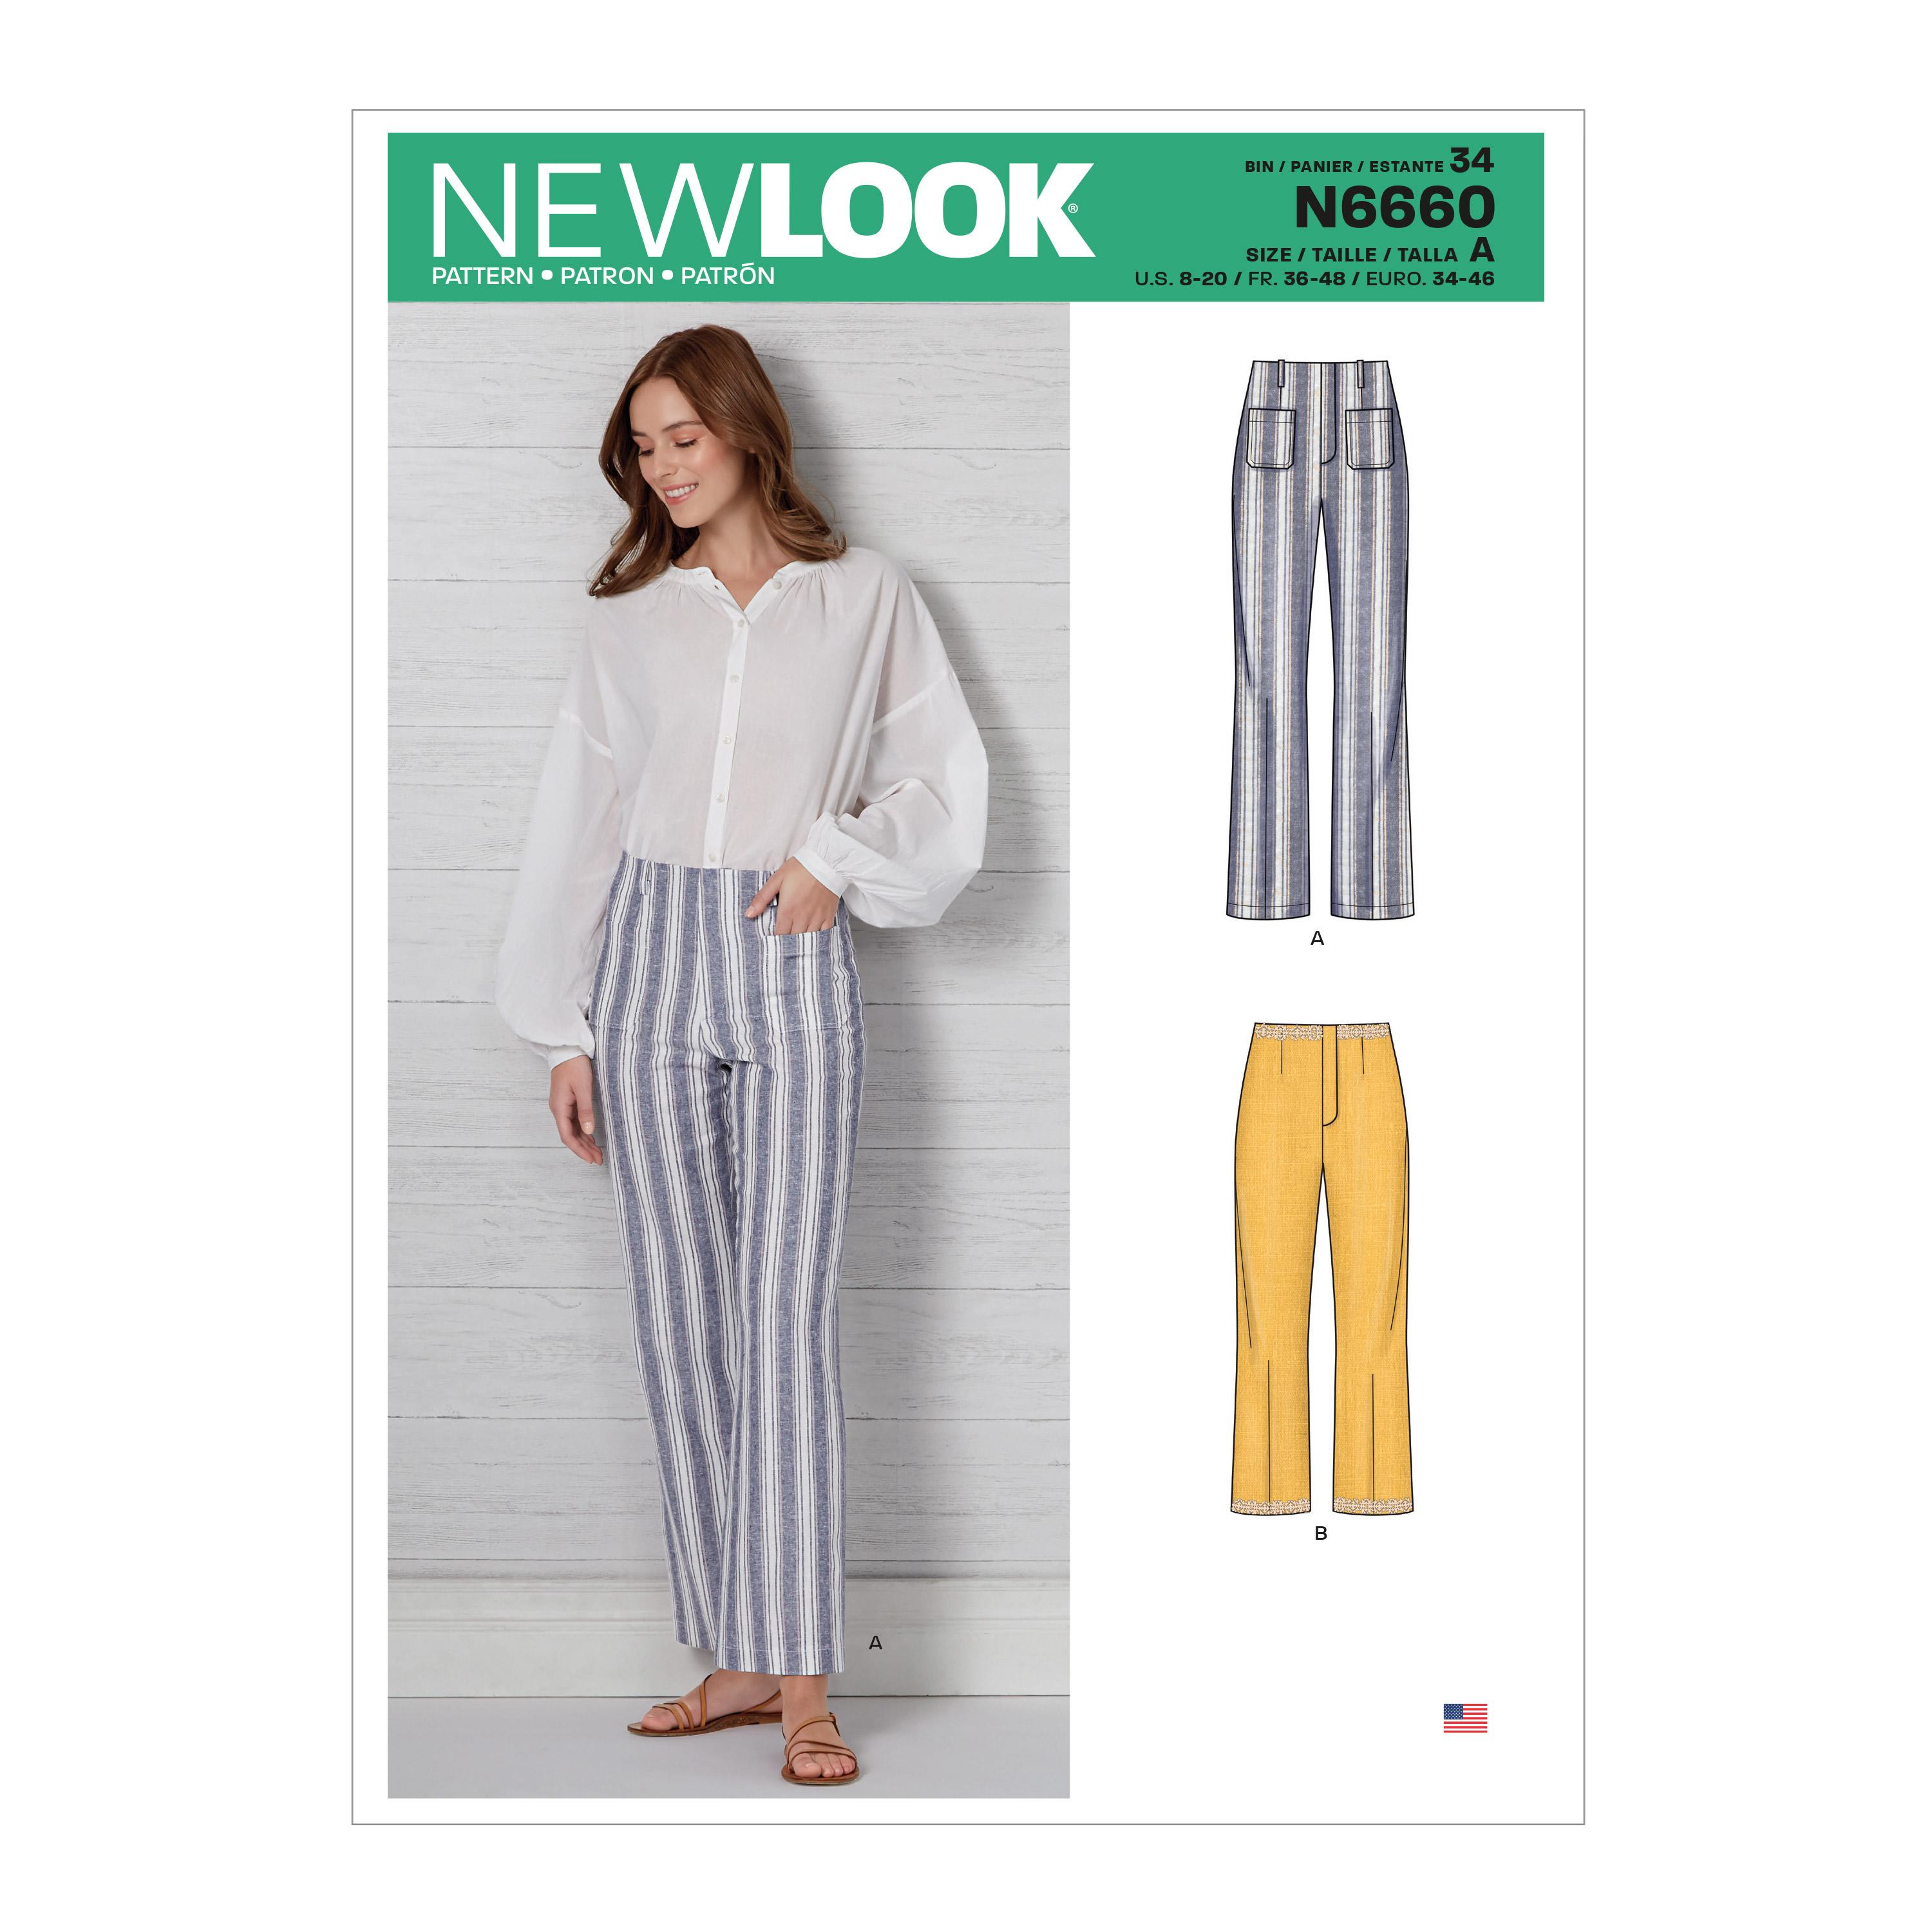 New Look Sewing Pattern N6660 Misses' High Waisted Flared Pants In Two Lengths